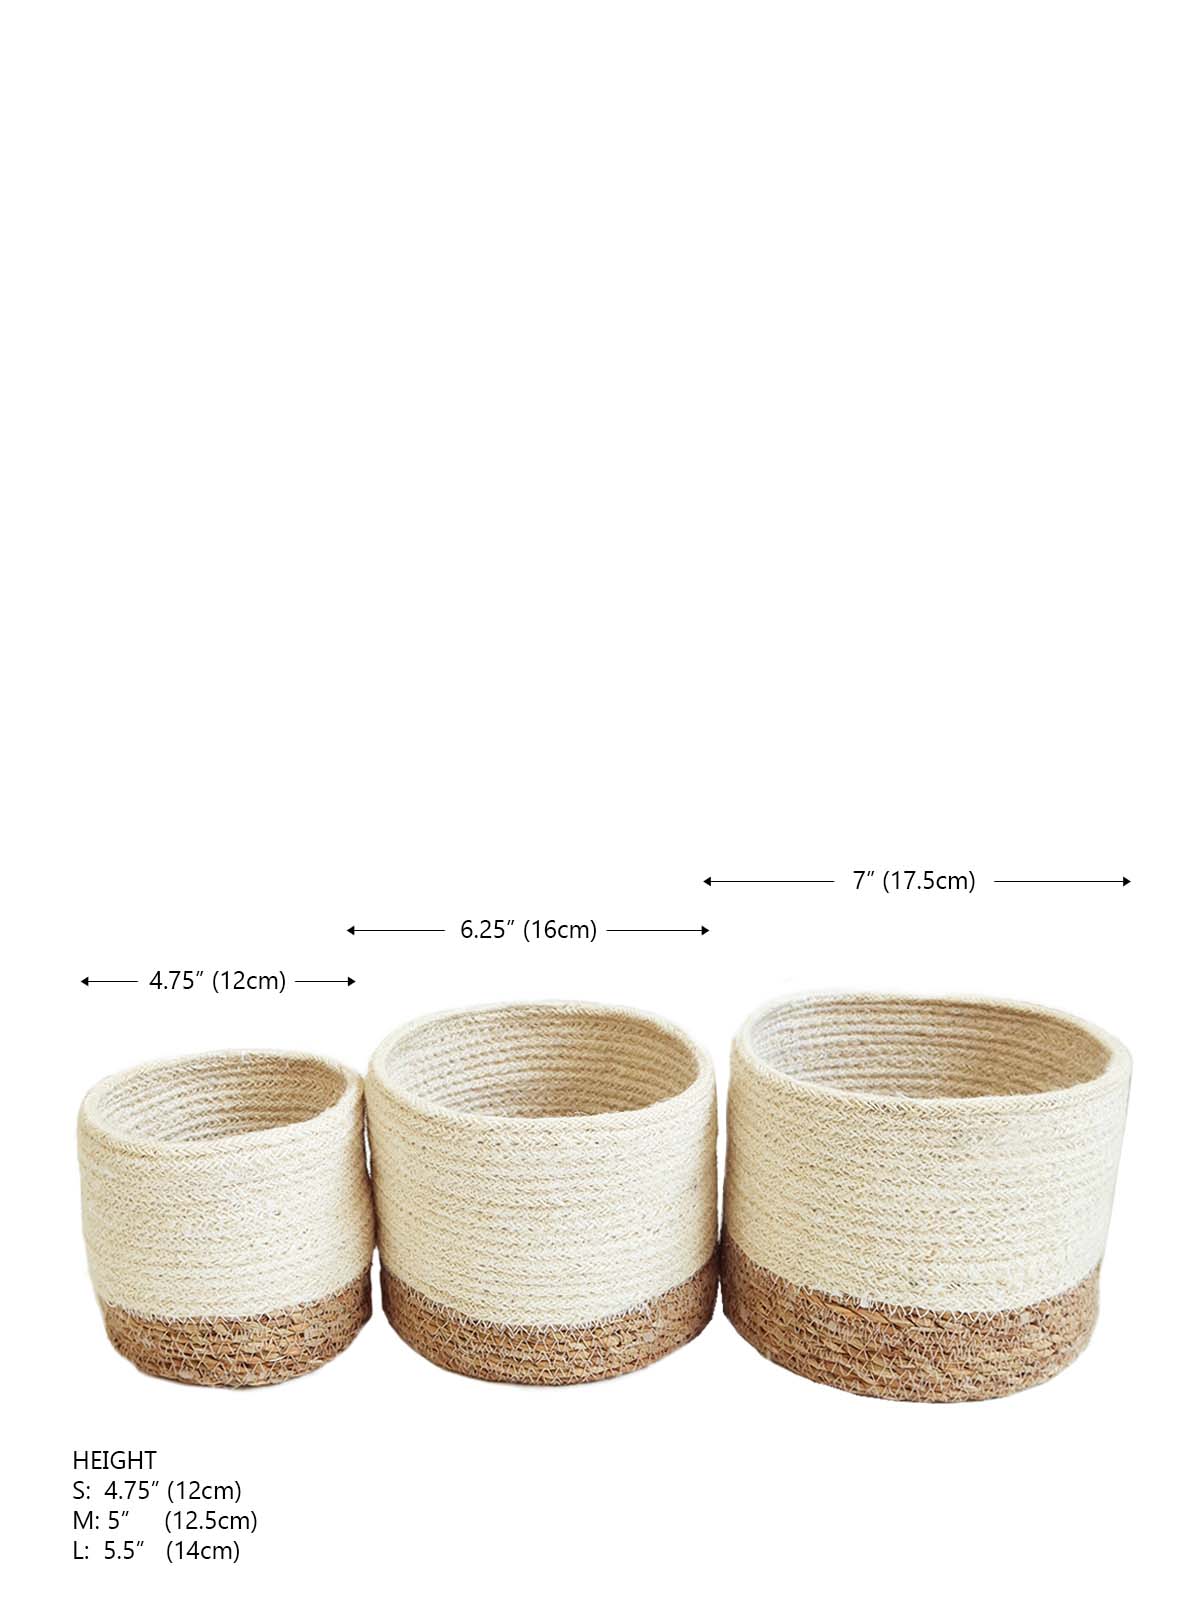 Choose from three sizes to fit your needs. Each bin is beautifully and sustainably made using natural seagrass and jute.